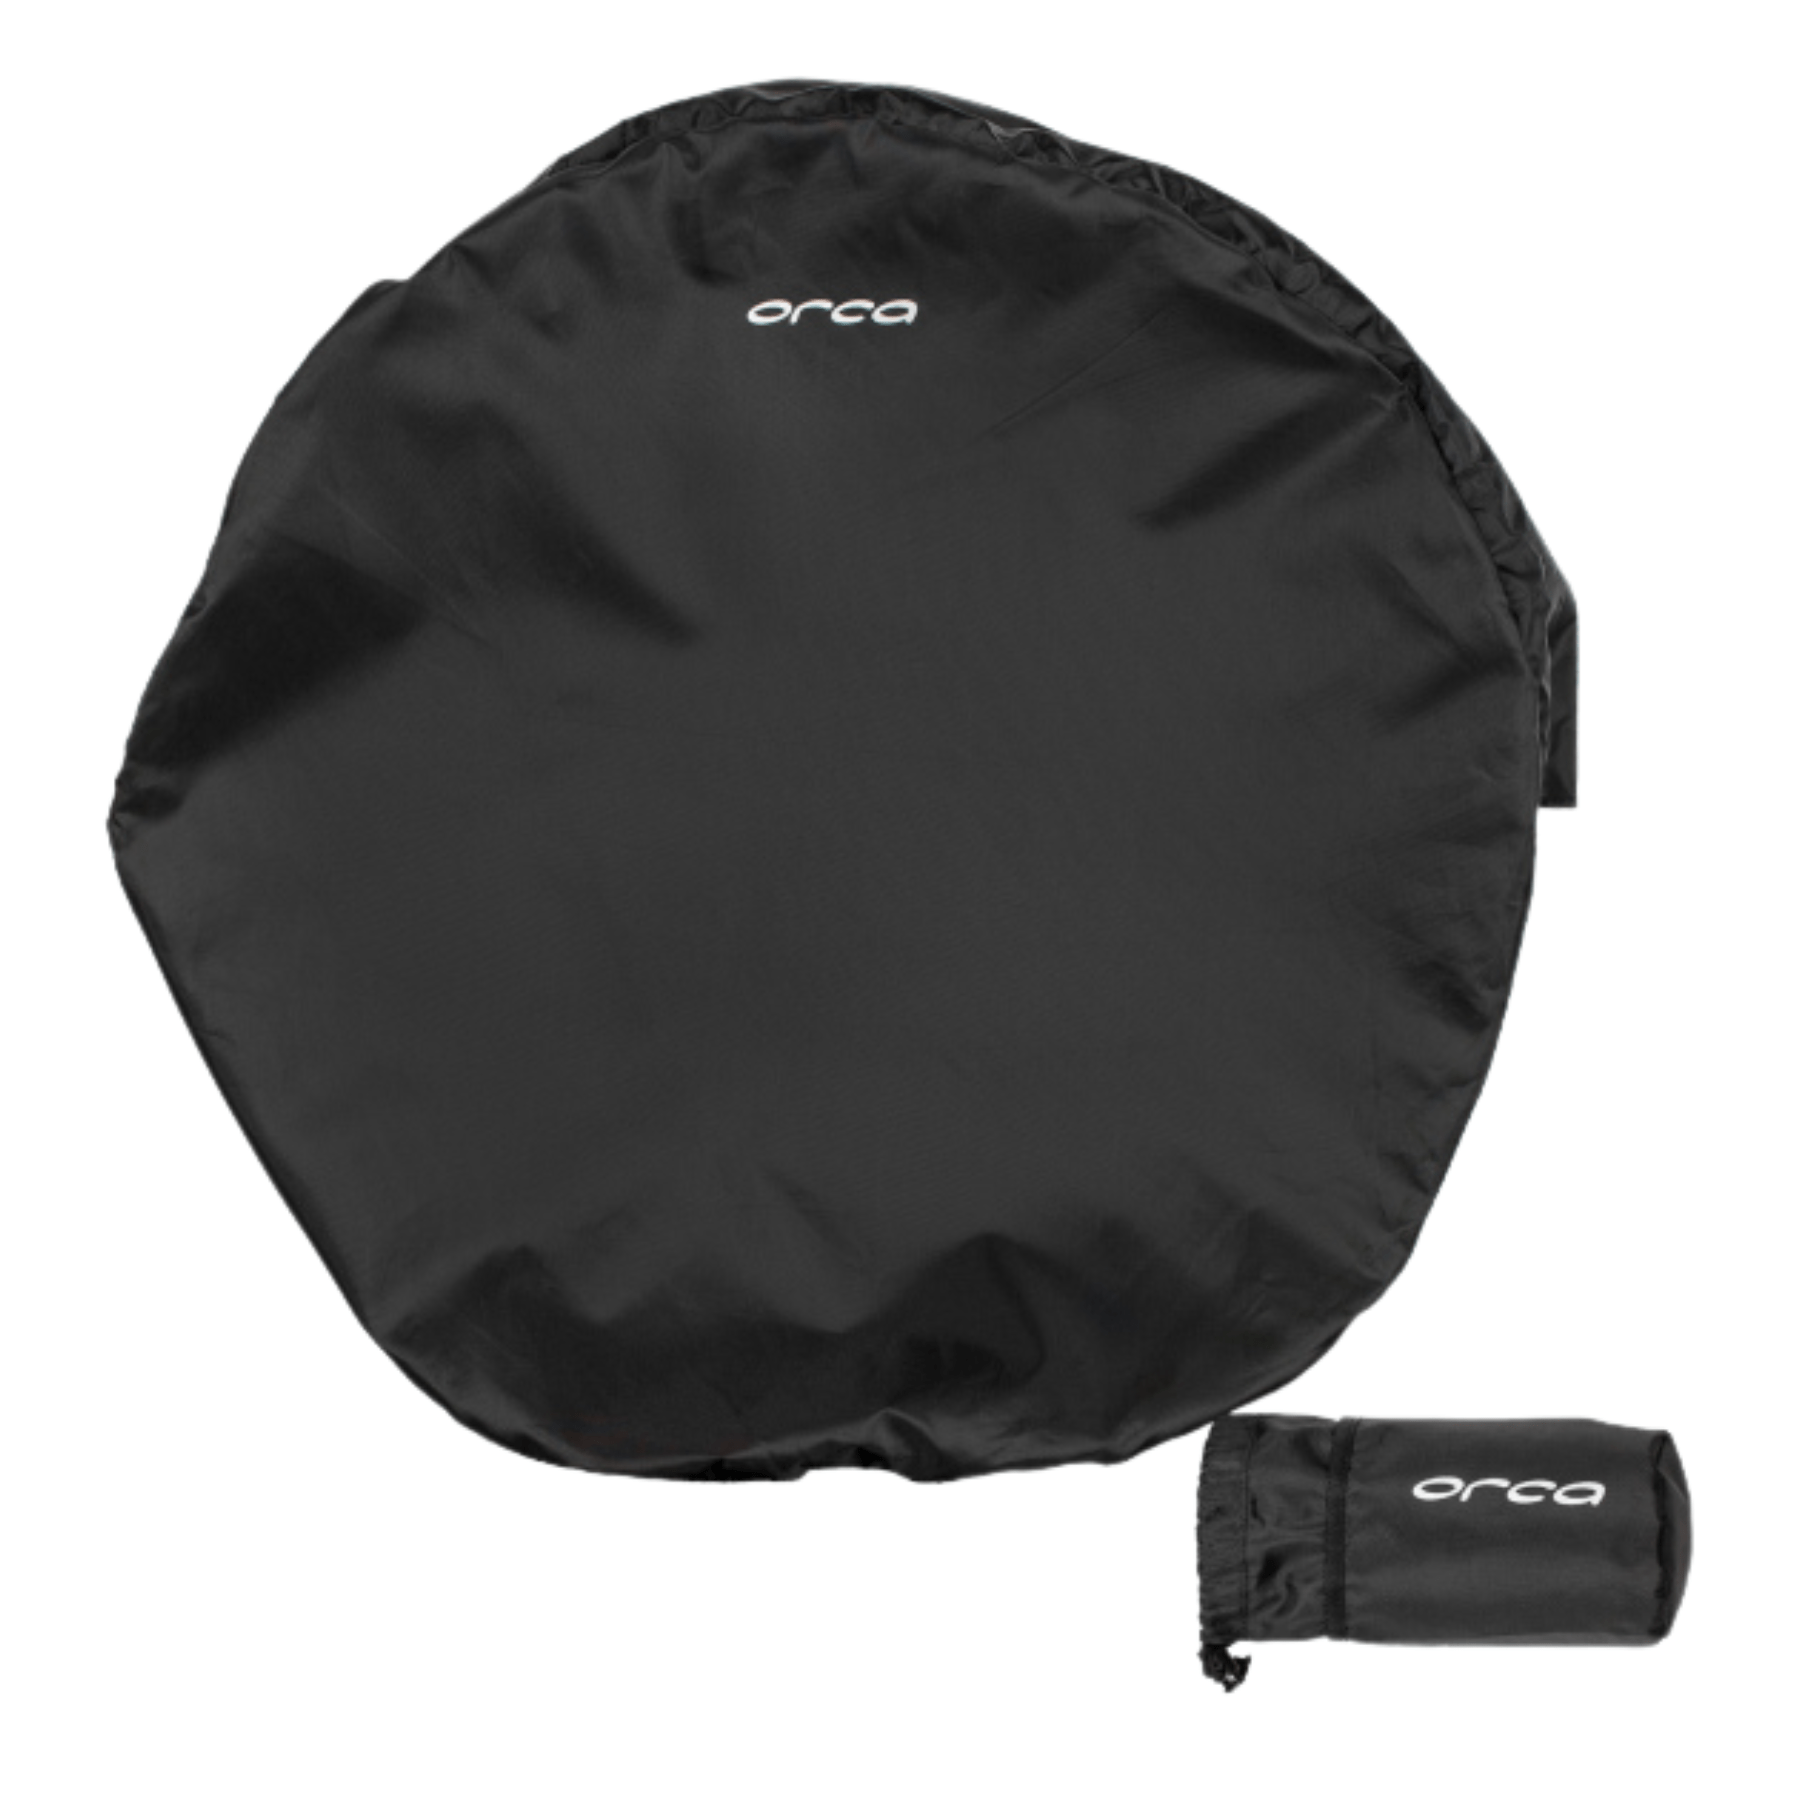 orca Wetsuit Accessory Changing Mat MAZA0001